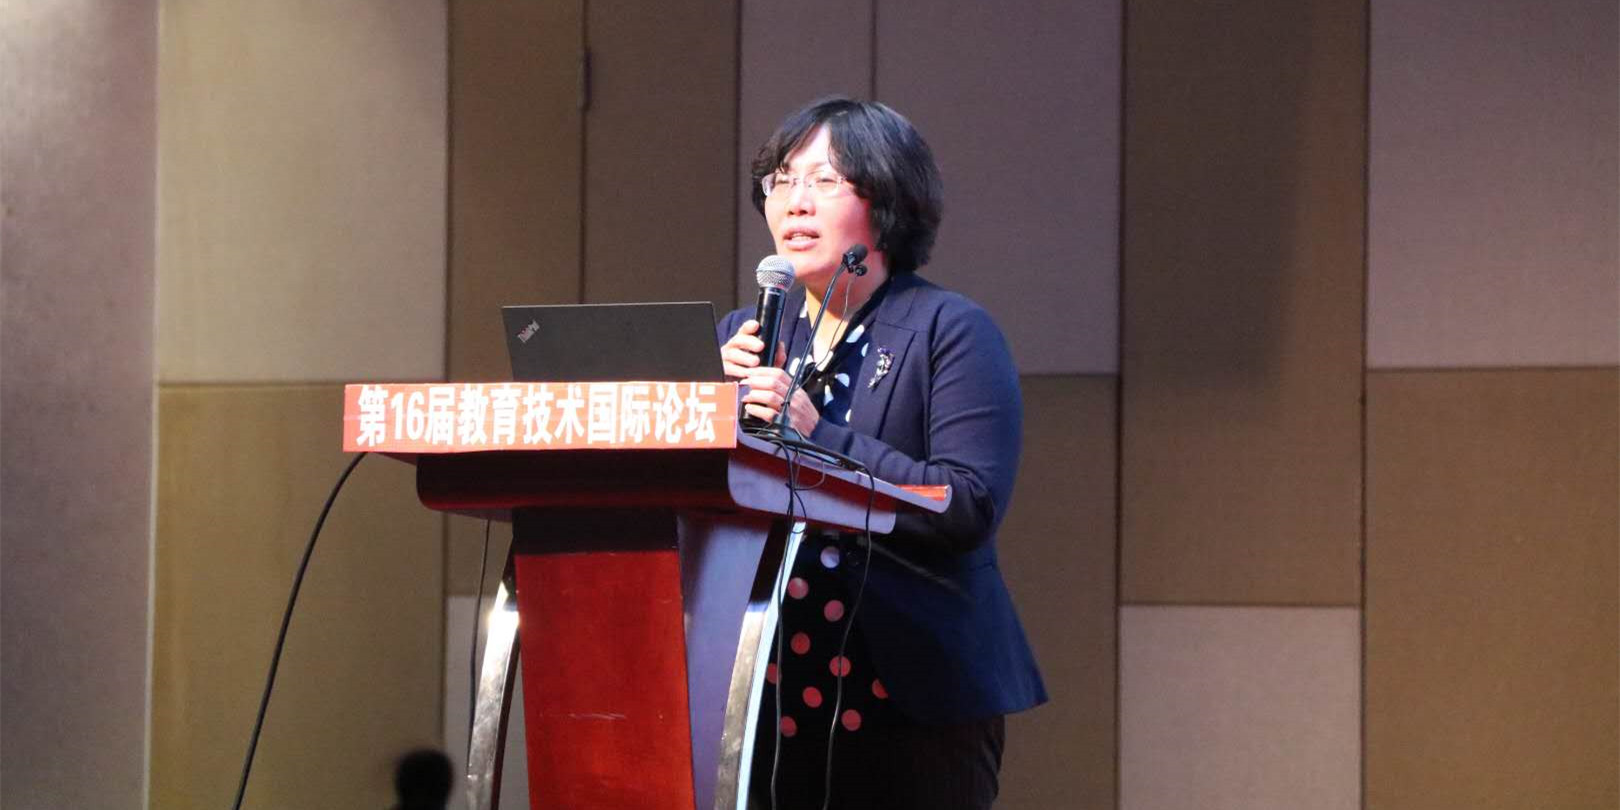 The 16th International Forum on Educational Technology Convened in XuZhou